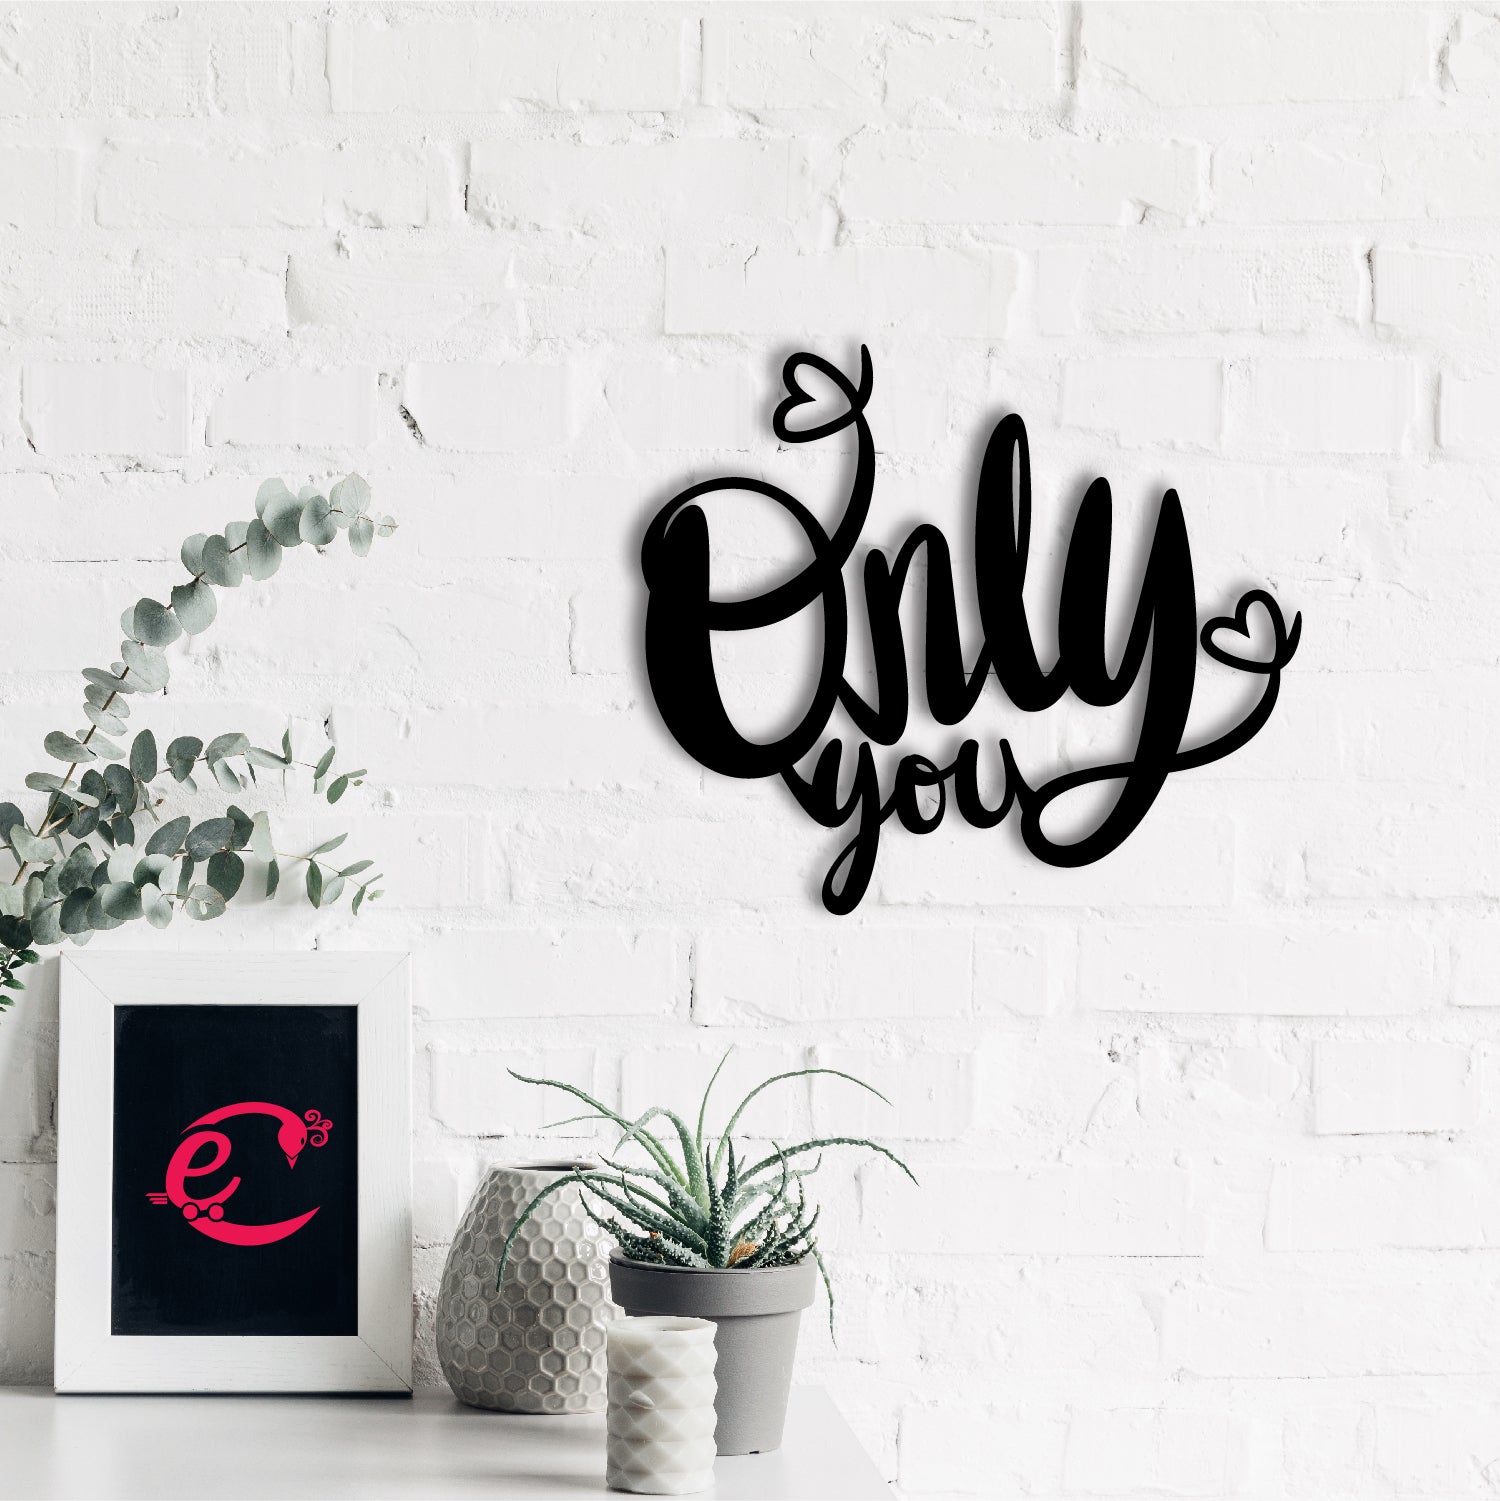 "Only You" Love Theme Black Engineered Wood Wall Art Cutout, Ready to Hang Home Decor